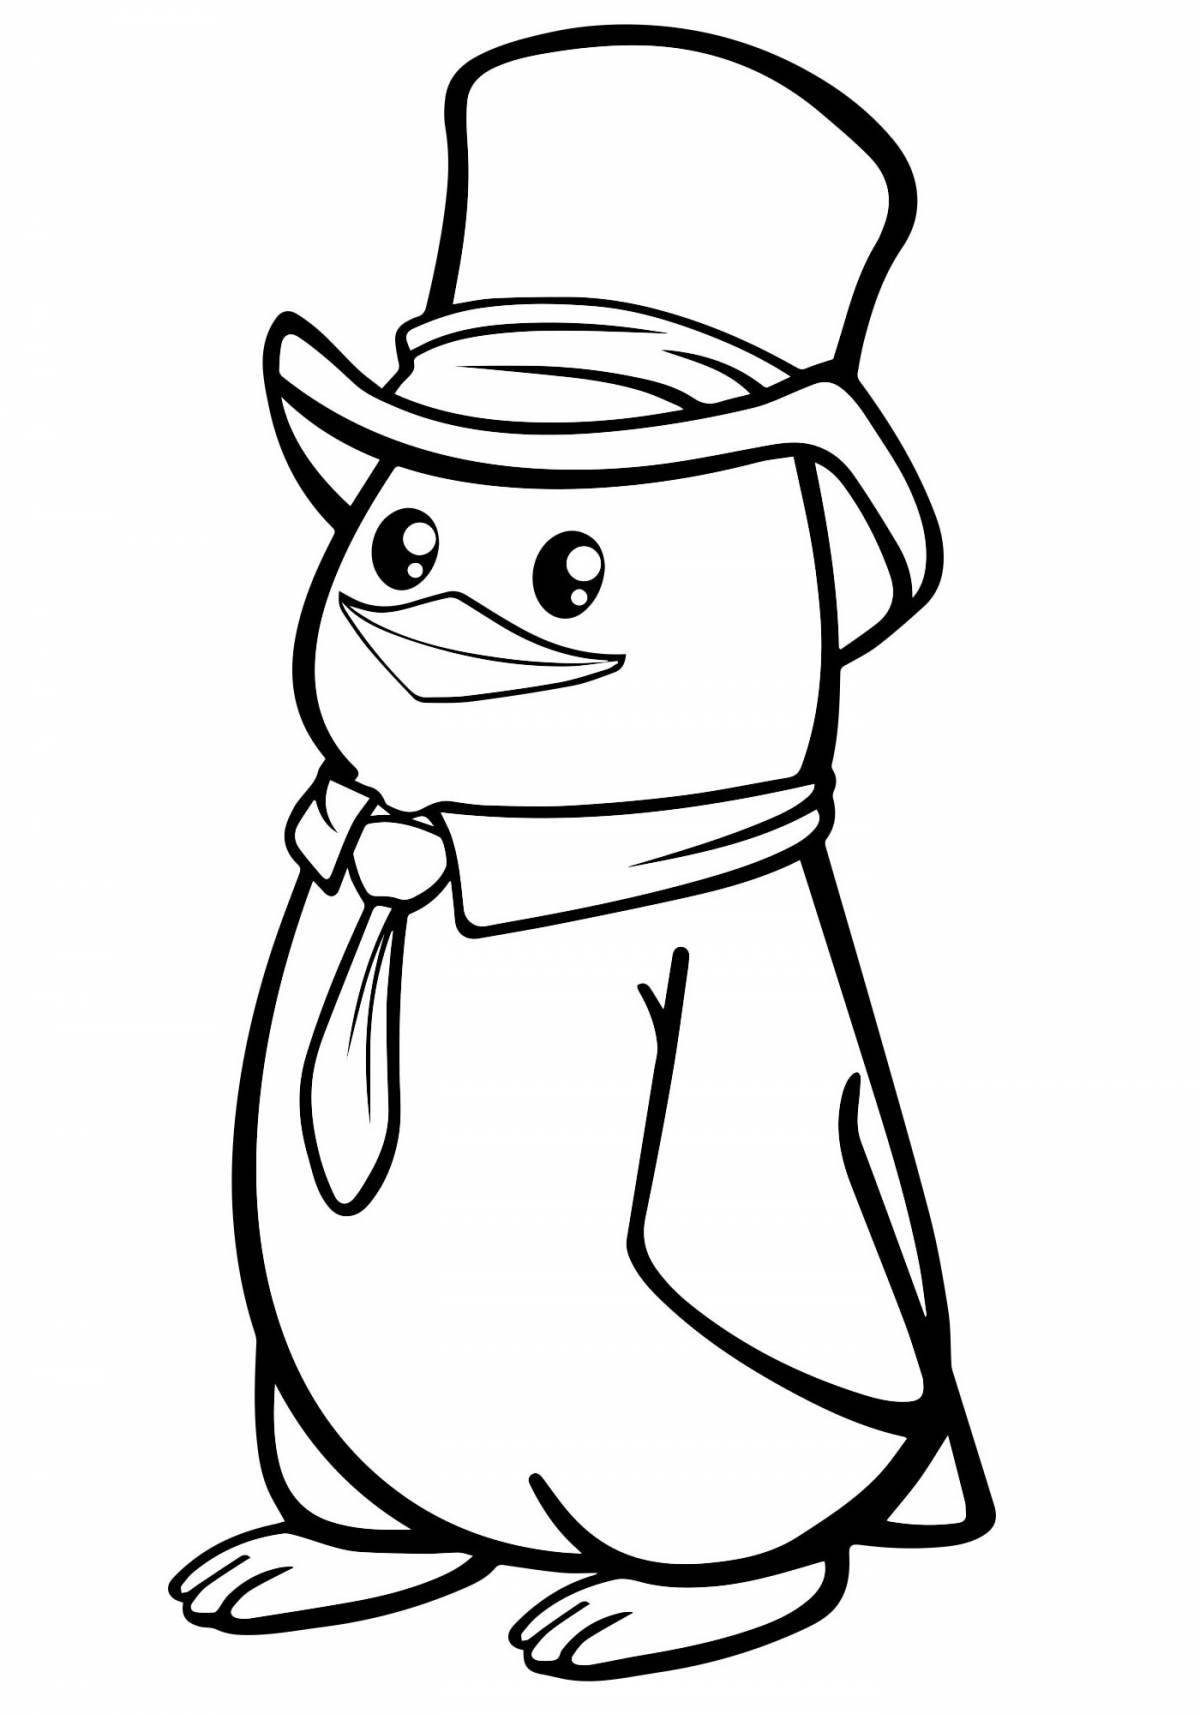 Live penguin coloring pages for kids